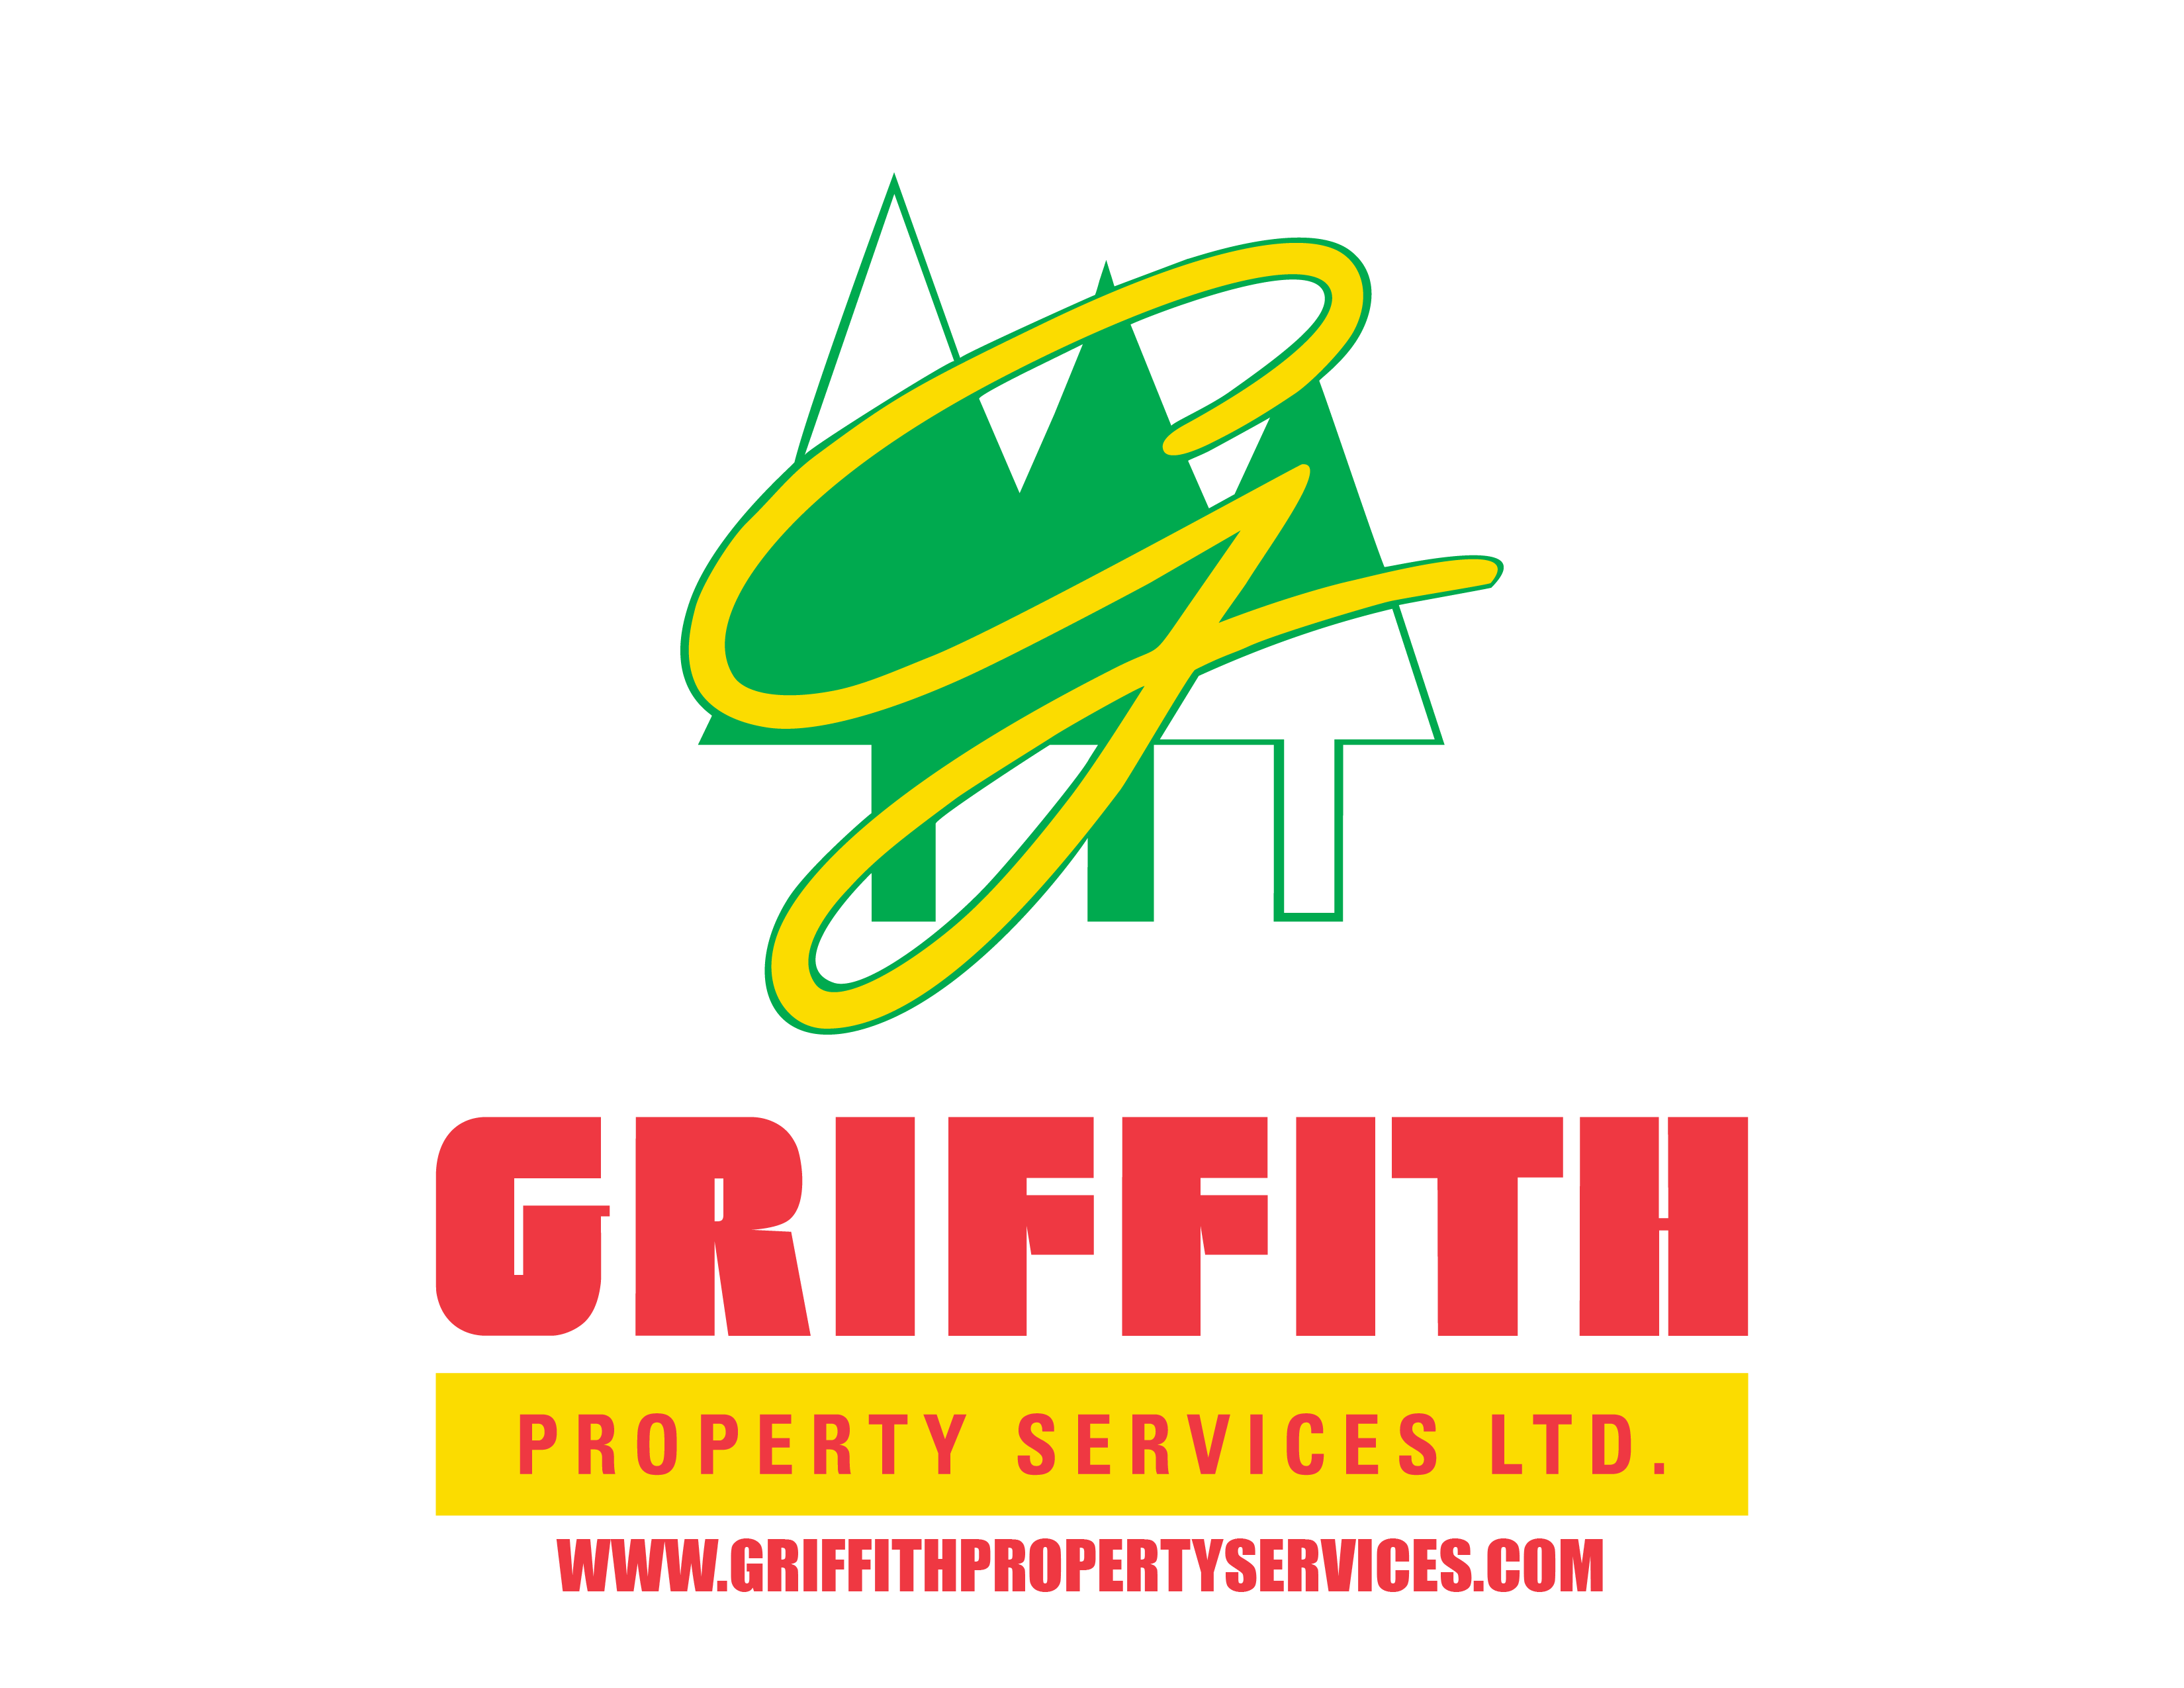 Griffith Property Services